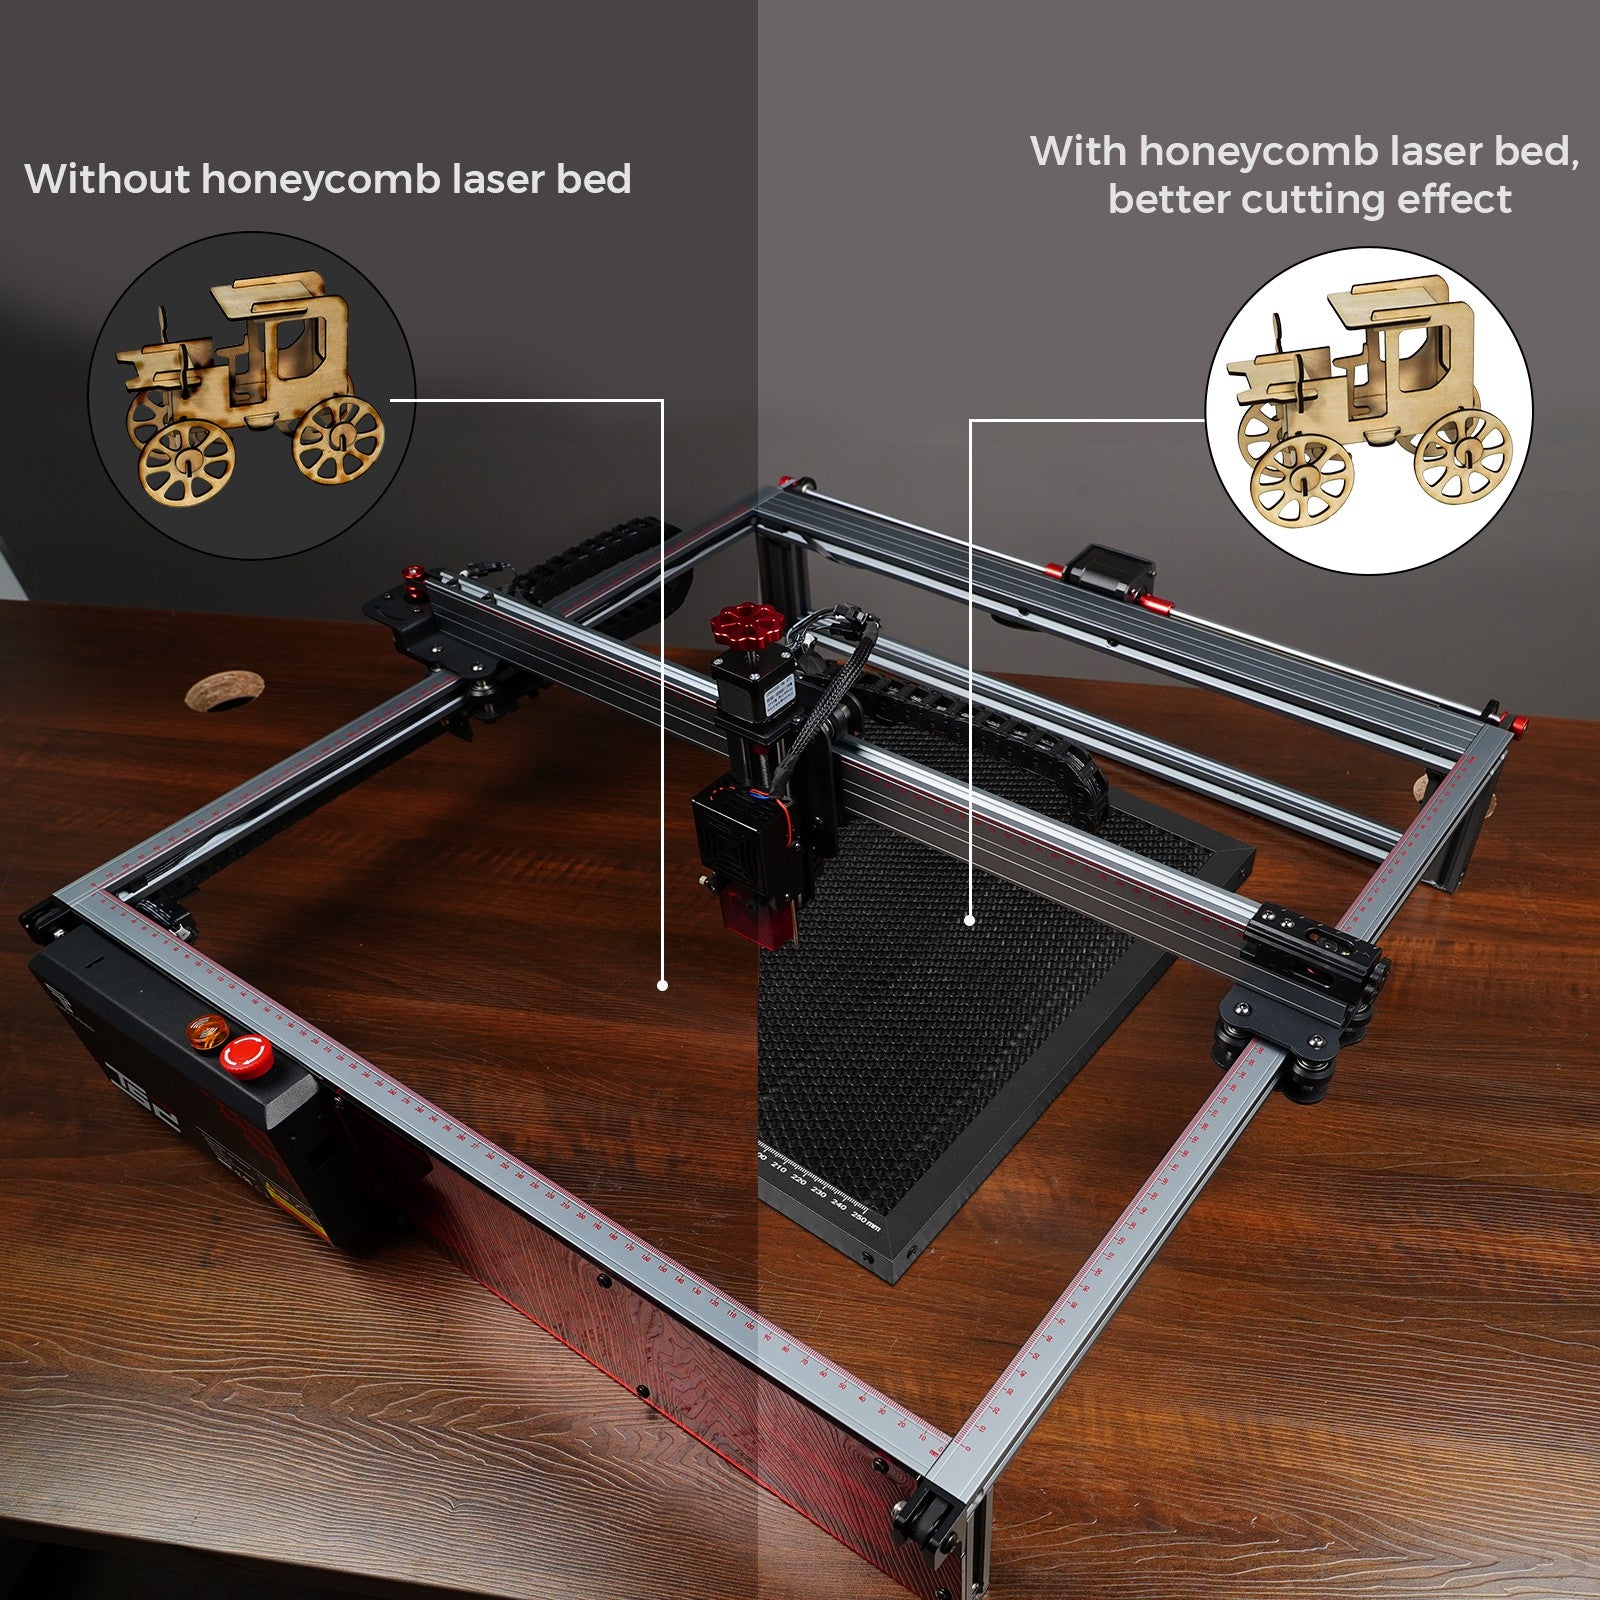 Honeycomb Working Table 500x500mm for CO2 Laser Bed Engraver Cutting wR